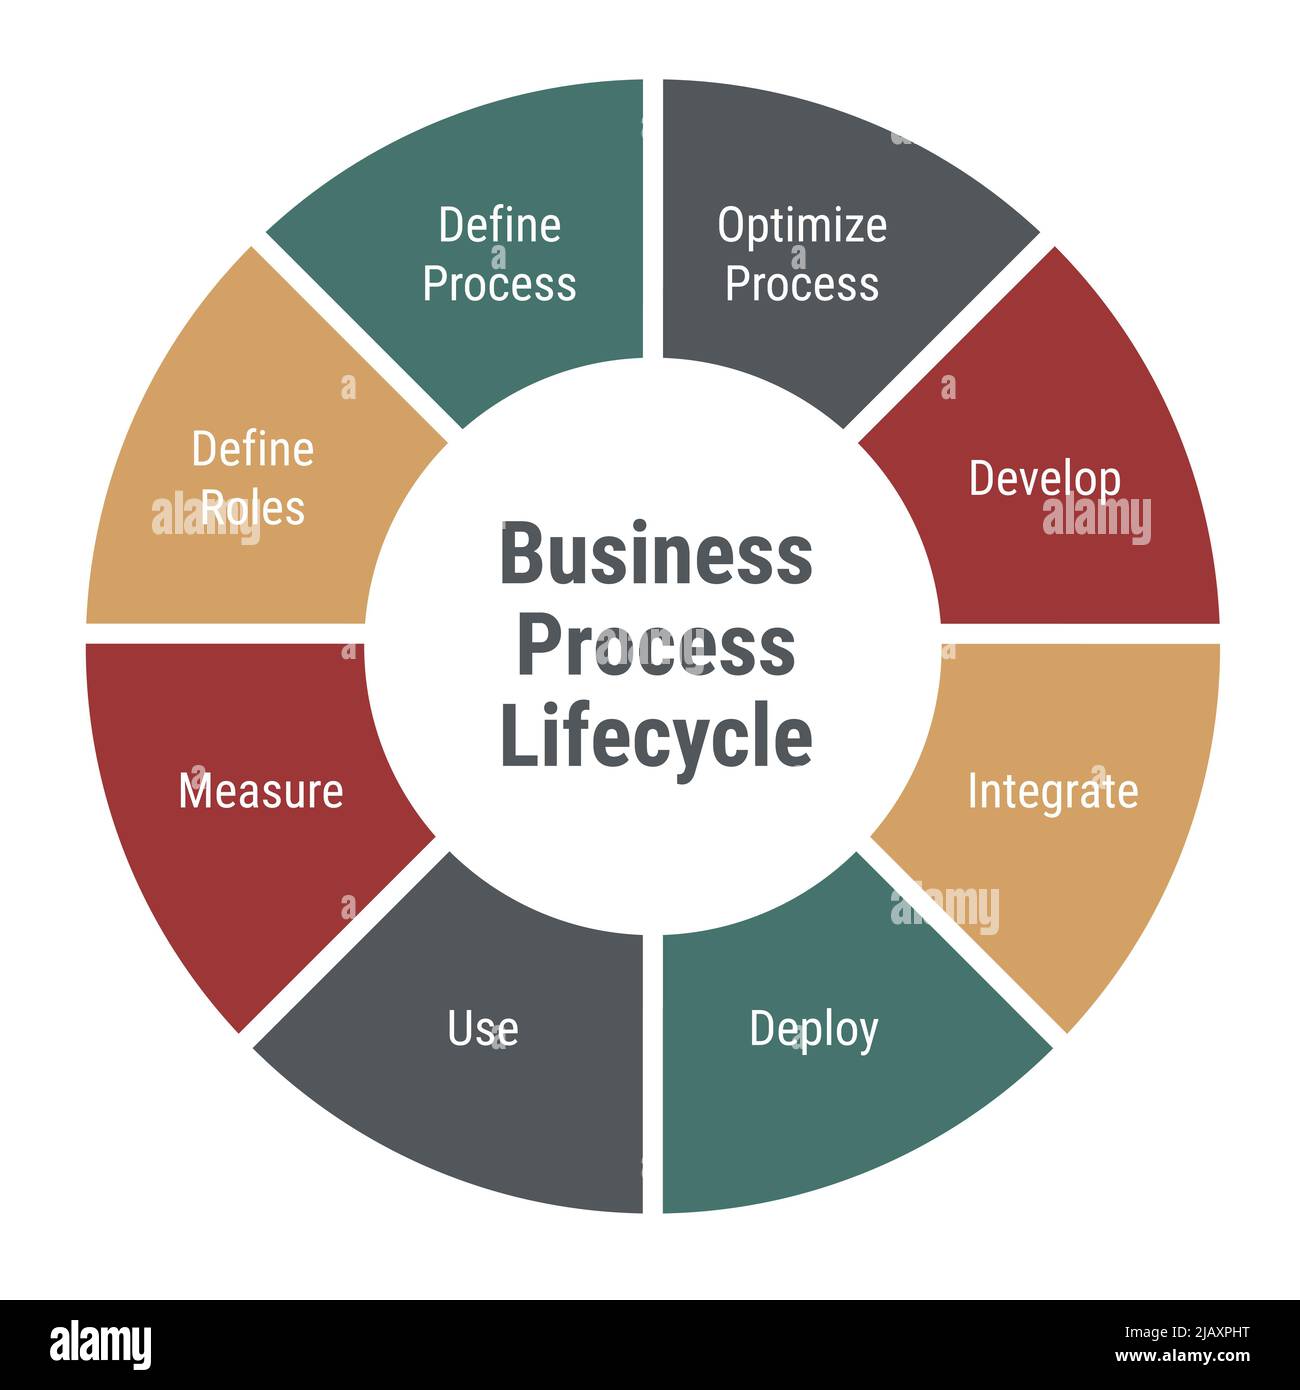 Business process lifecycle diagram. Circle infographic with 8 parts and text. Optimize and develop, integrate, deploy and use, measure, define roles. Stock Vector